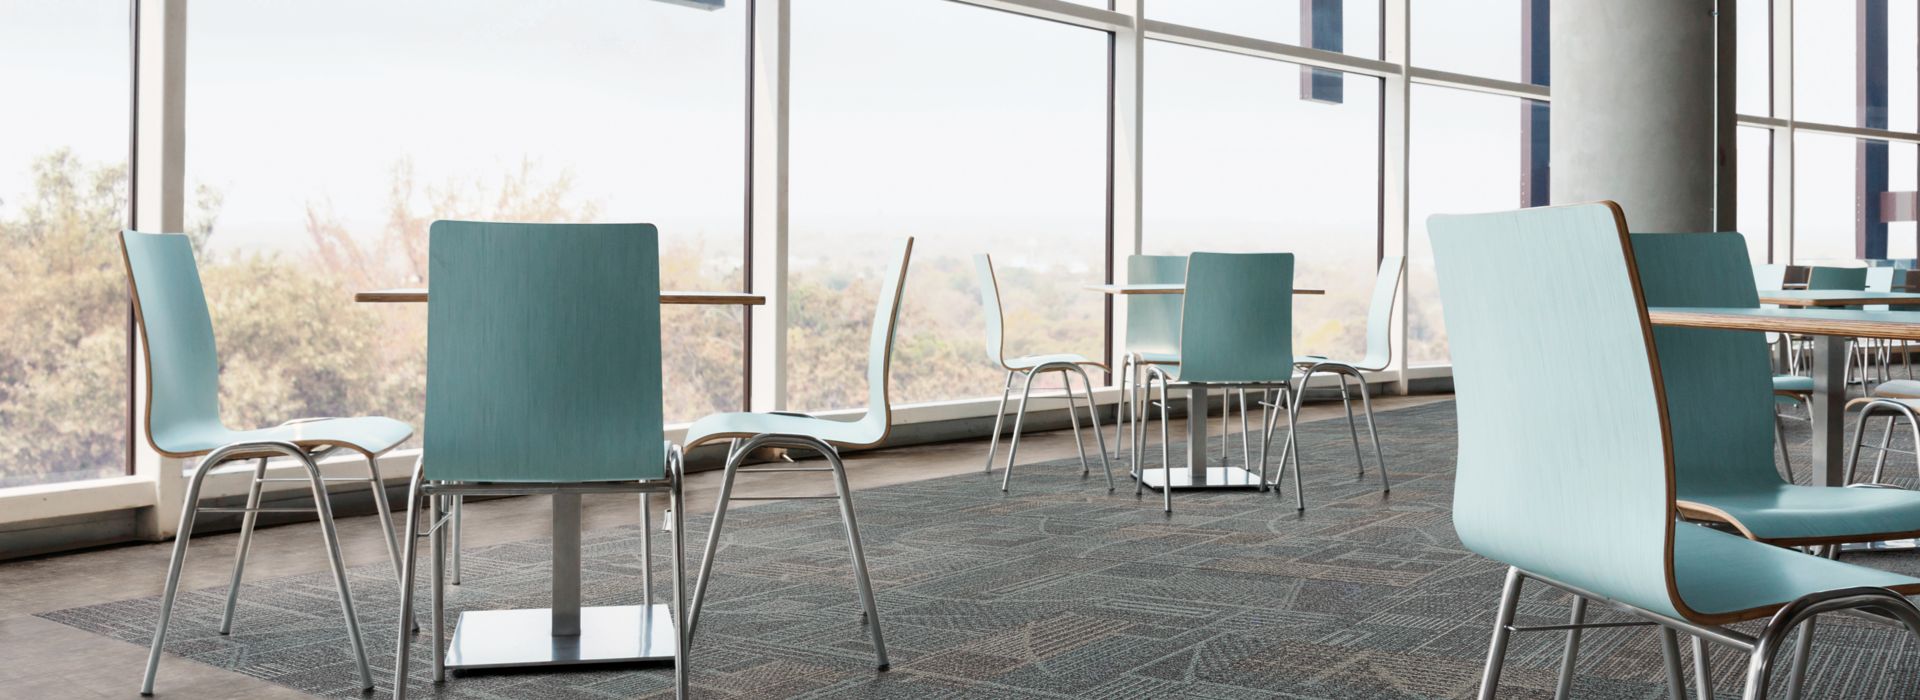 Interface Layout carpet tile and Textured Stones LVT in cafe area with teal colored chairs and natural light imagen número 1